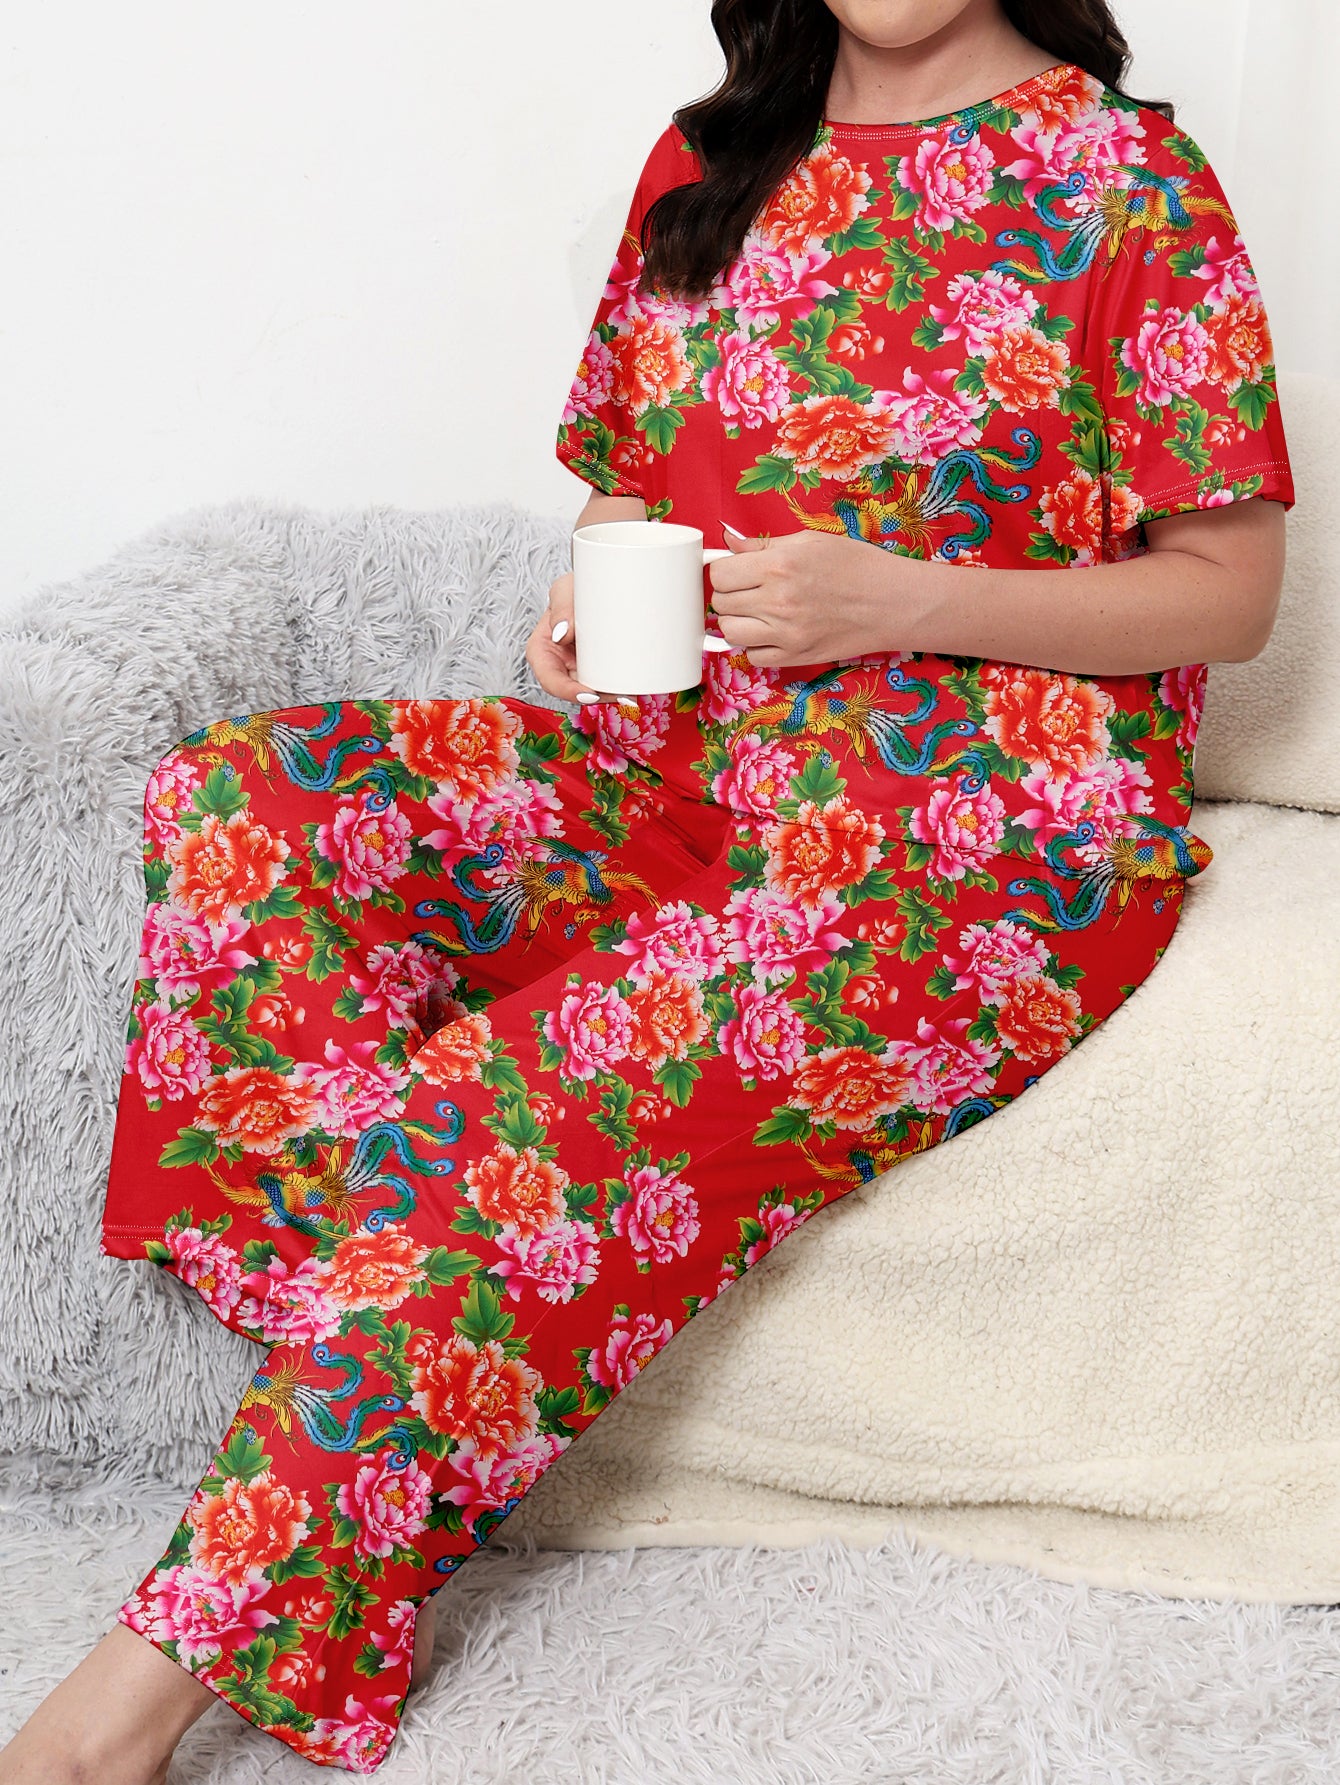 Plus Size Chinese Traditional Northeast Flower Print Short Sleeve Top & Pants Pajamas Set for Women